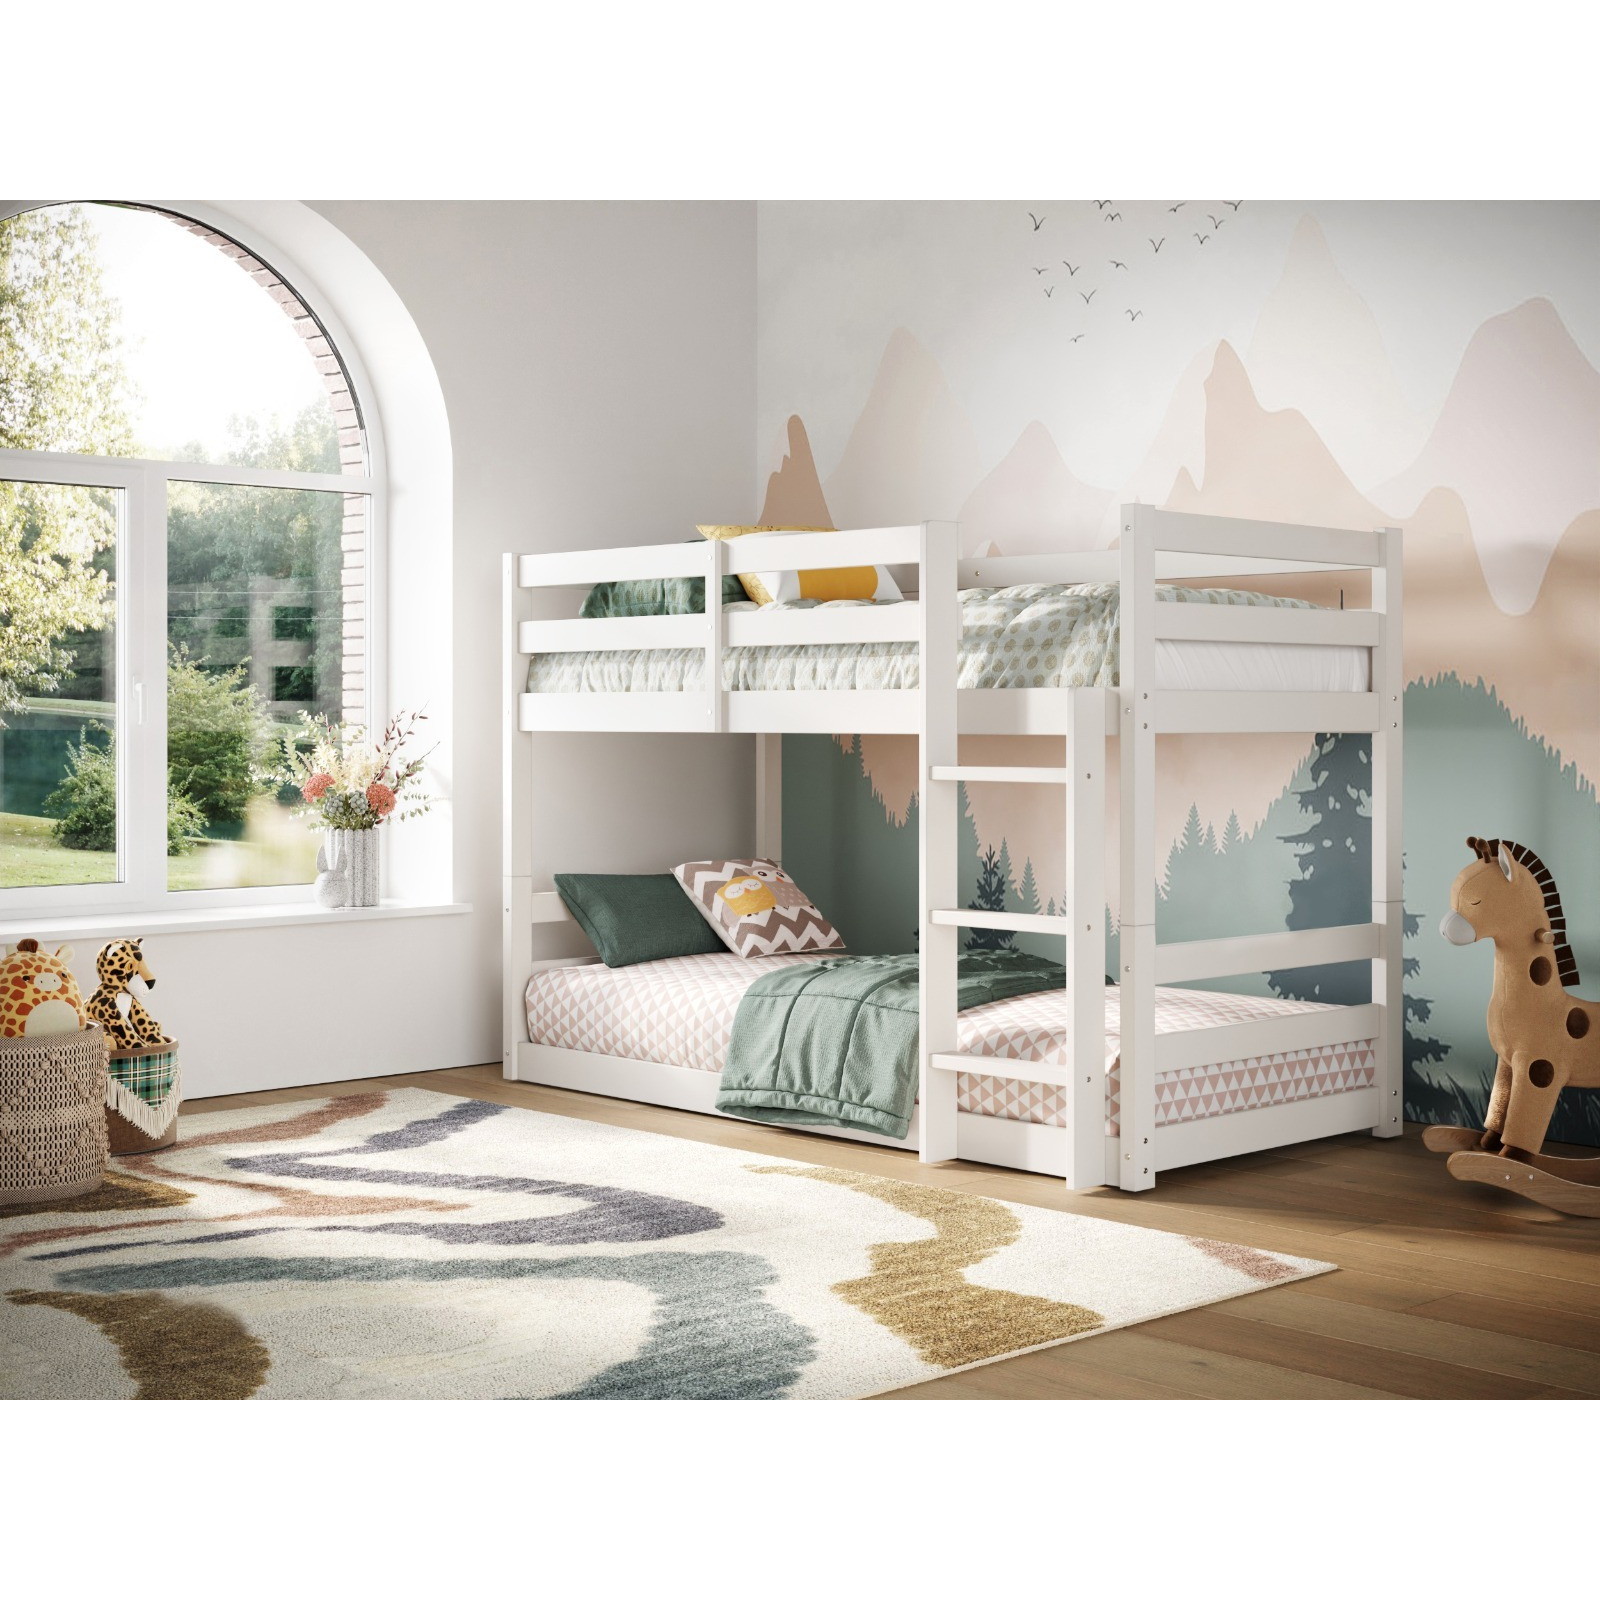 Flair Shasha Low Shorty Wooden Bunk Bed White - image 1